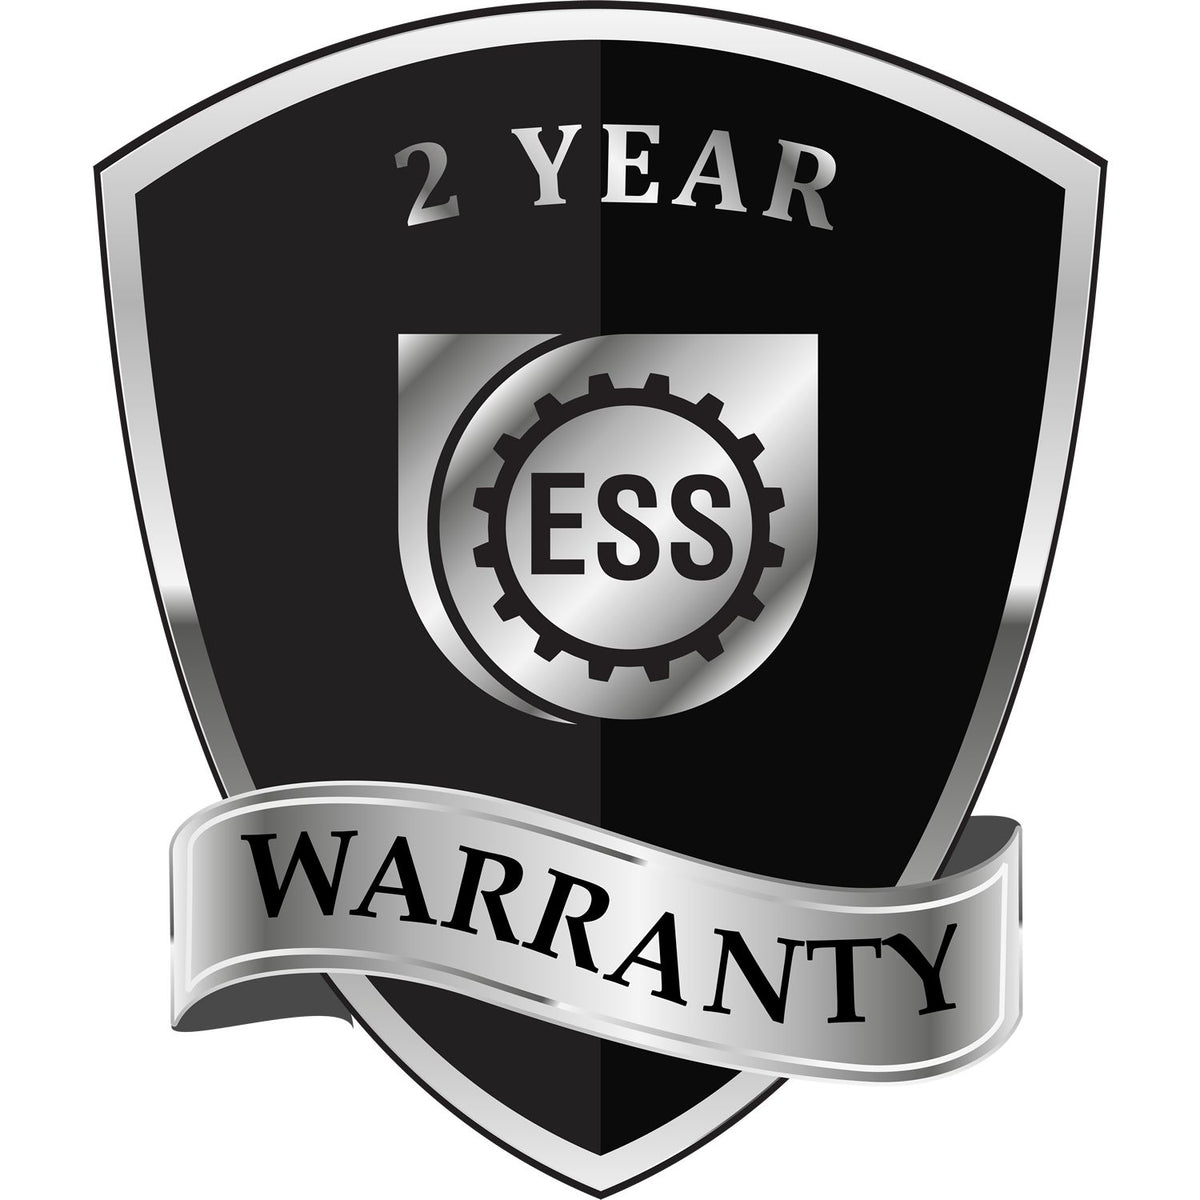 A black and silver badge or emblem showing warranty information for the Long Reach Montana Geology Seal